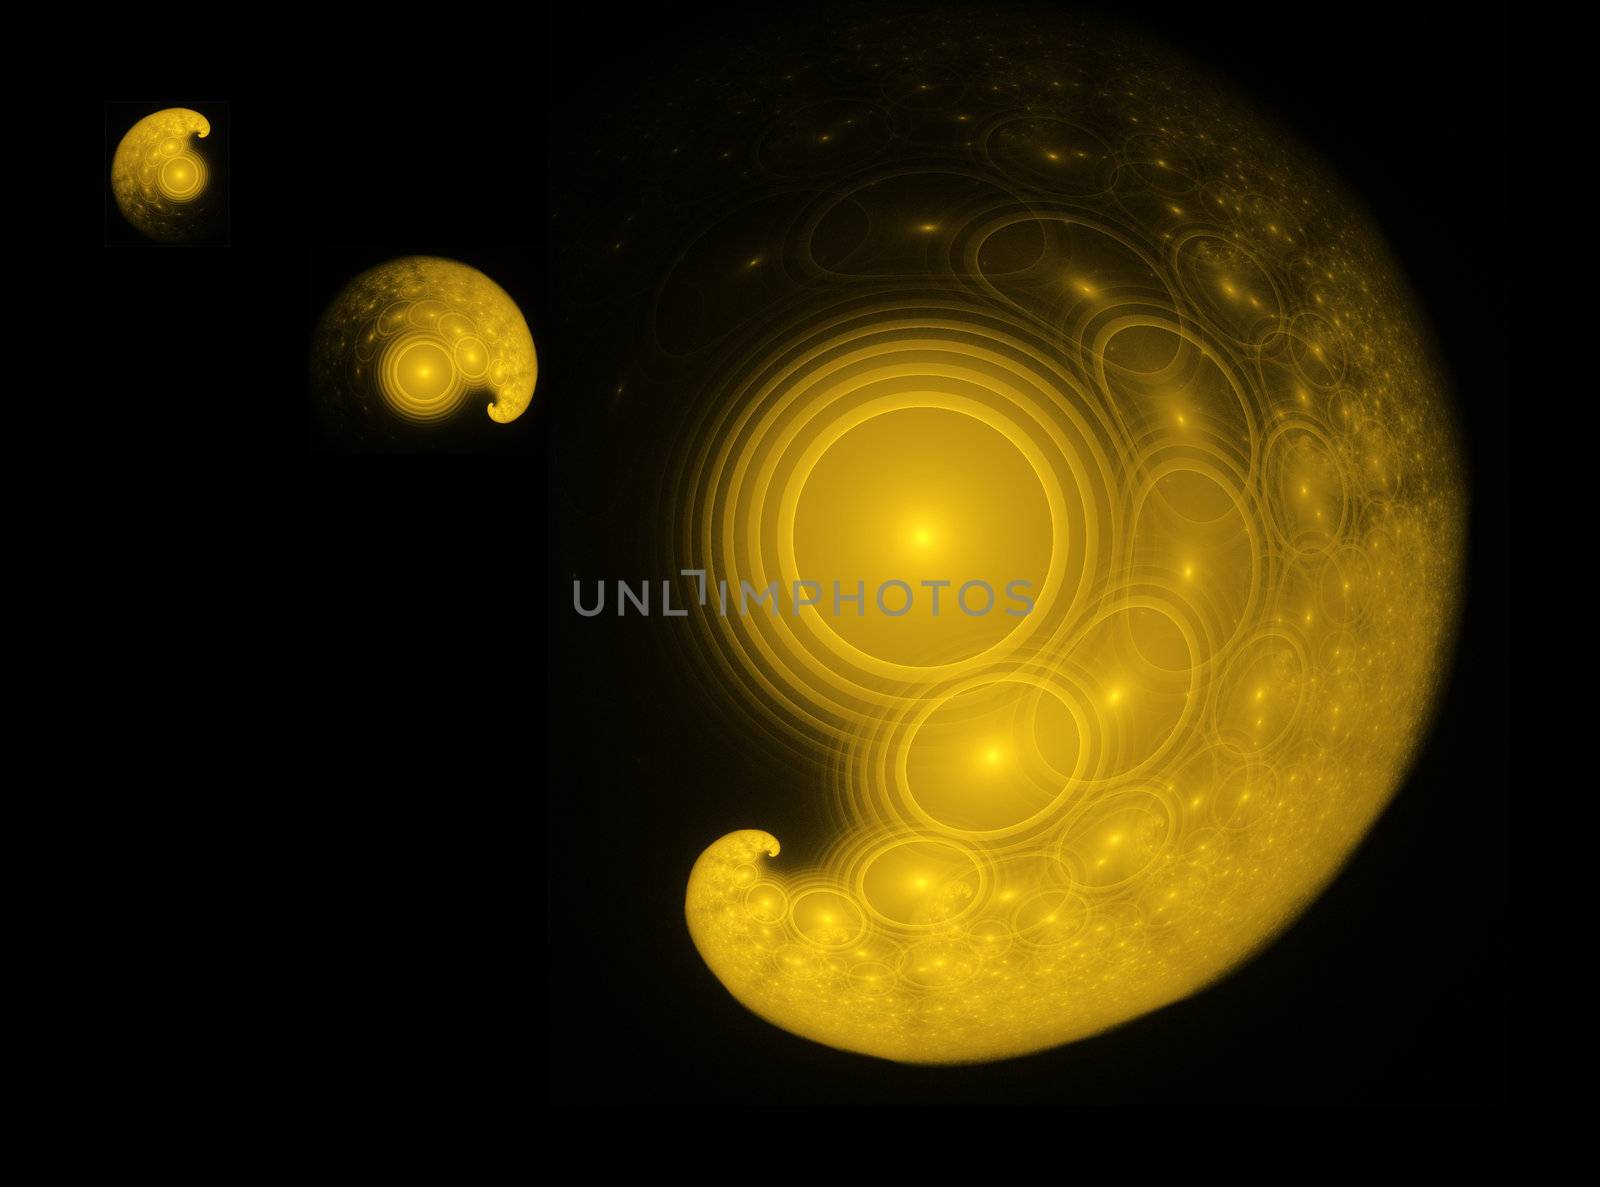 Virtual planetary system created with fractals